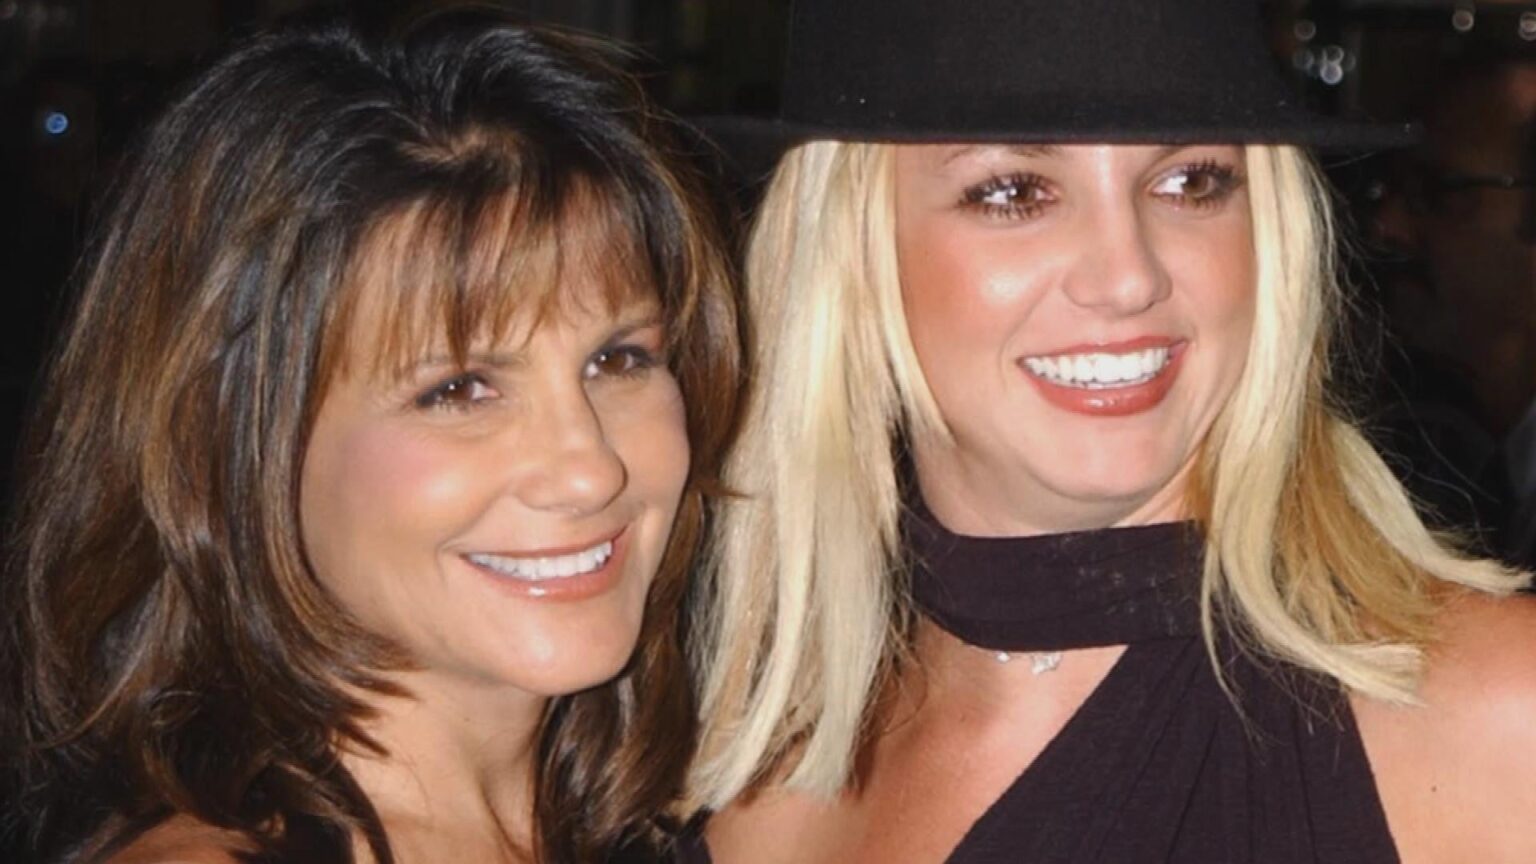 Lynne Spears took to Instagram to give fans a cryptic message about Britney's conservatorship battle. Dive in and see what lies ahead for the pop icon.